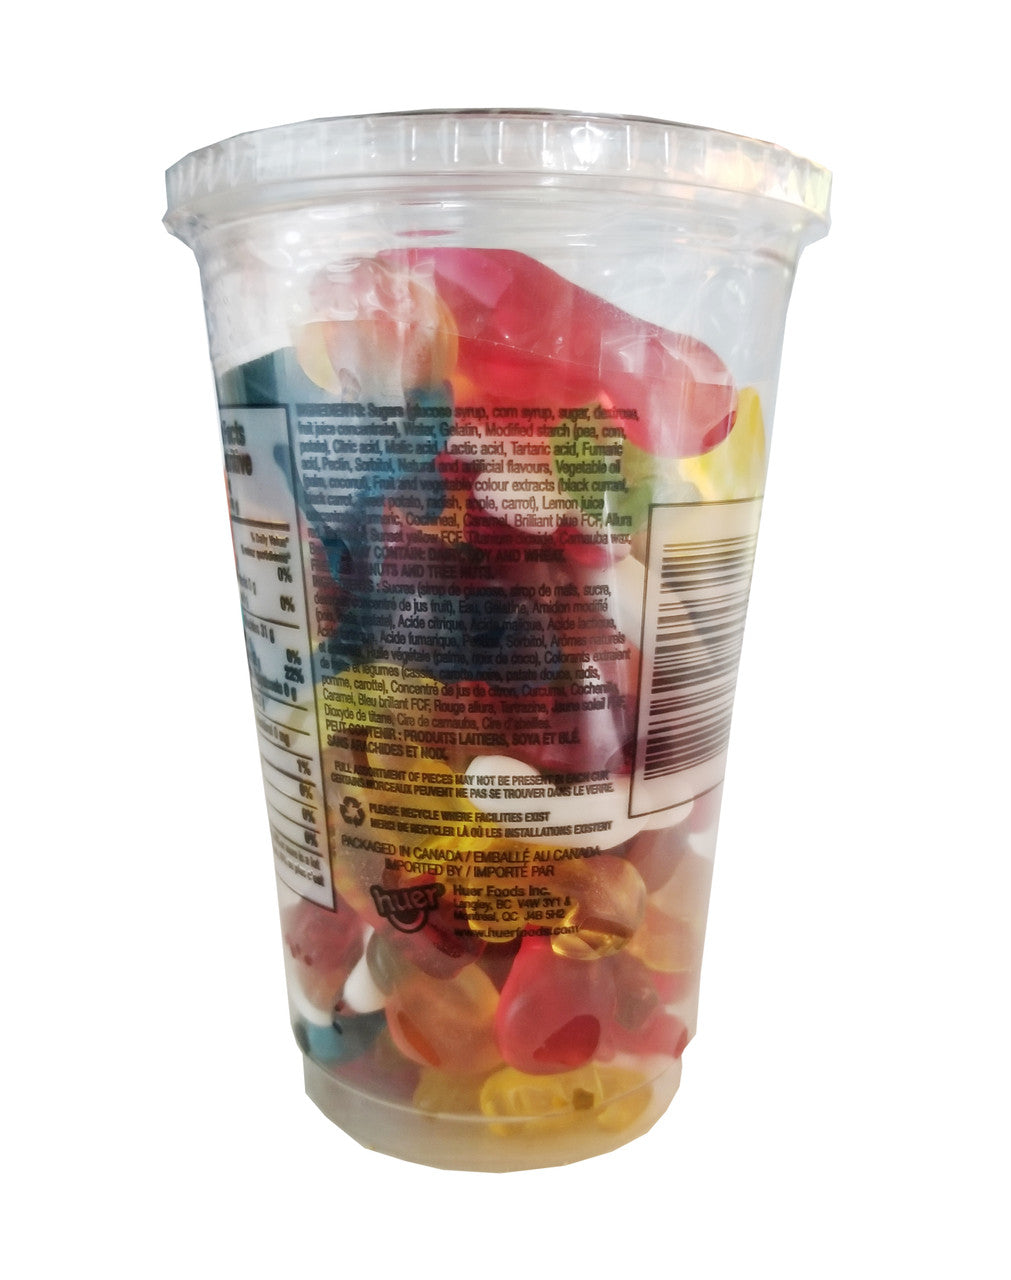 Huer Super Mix Candy Cup, 370g/13 oz., {Imported from Canada}